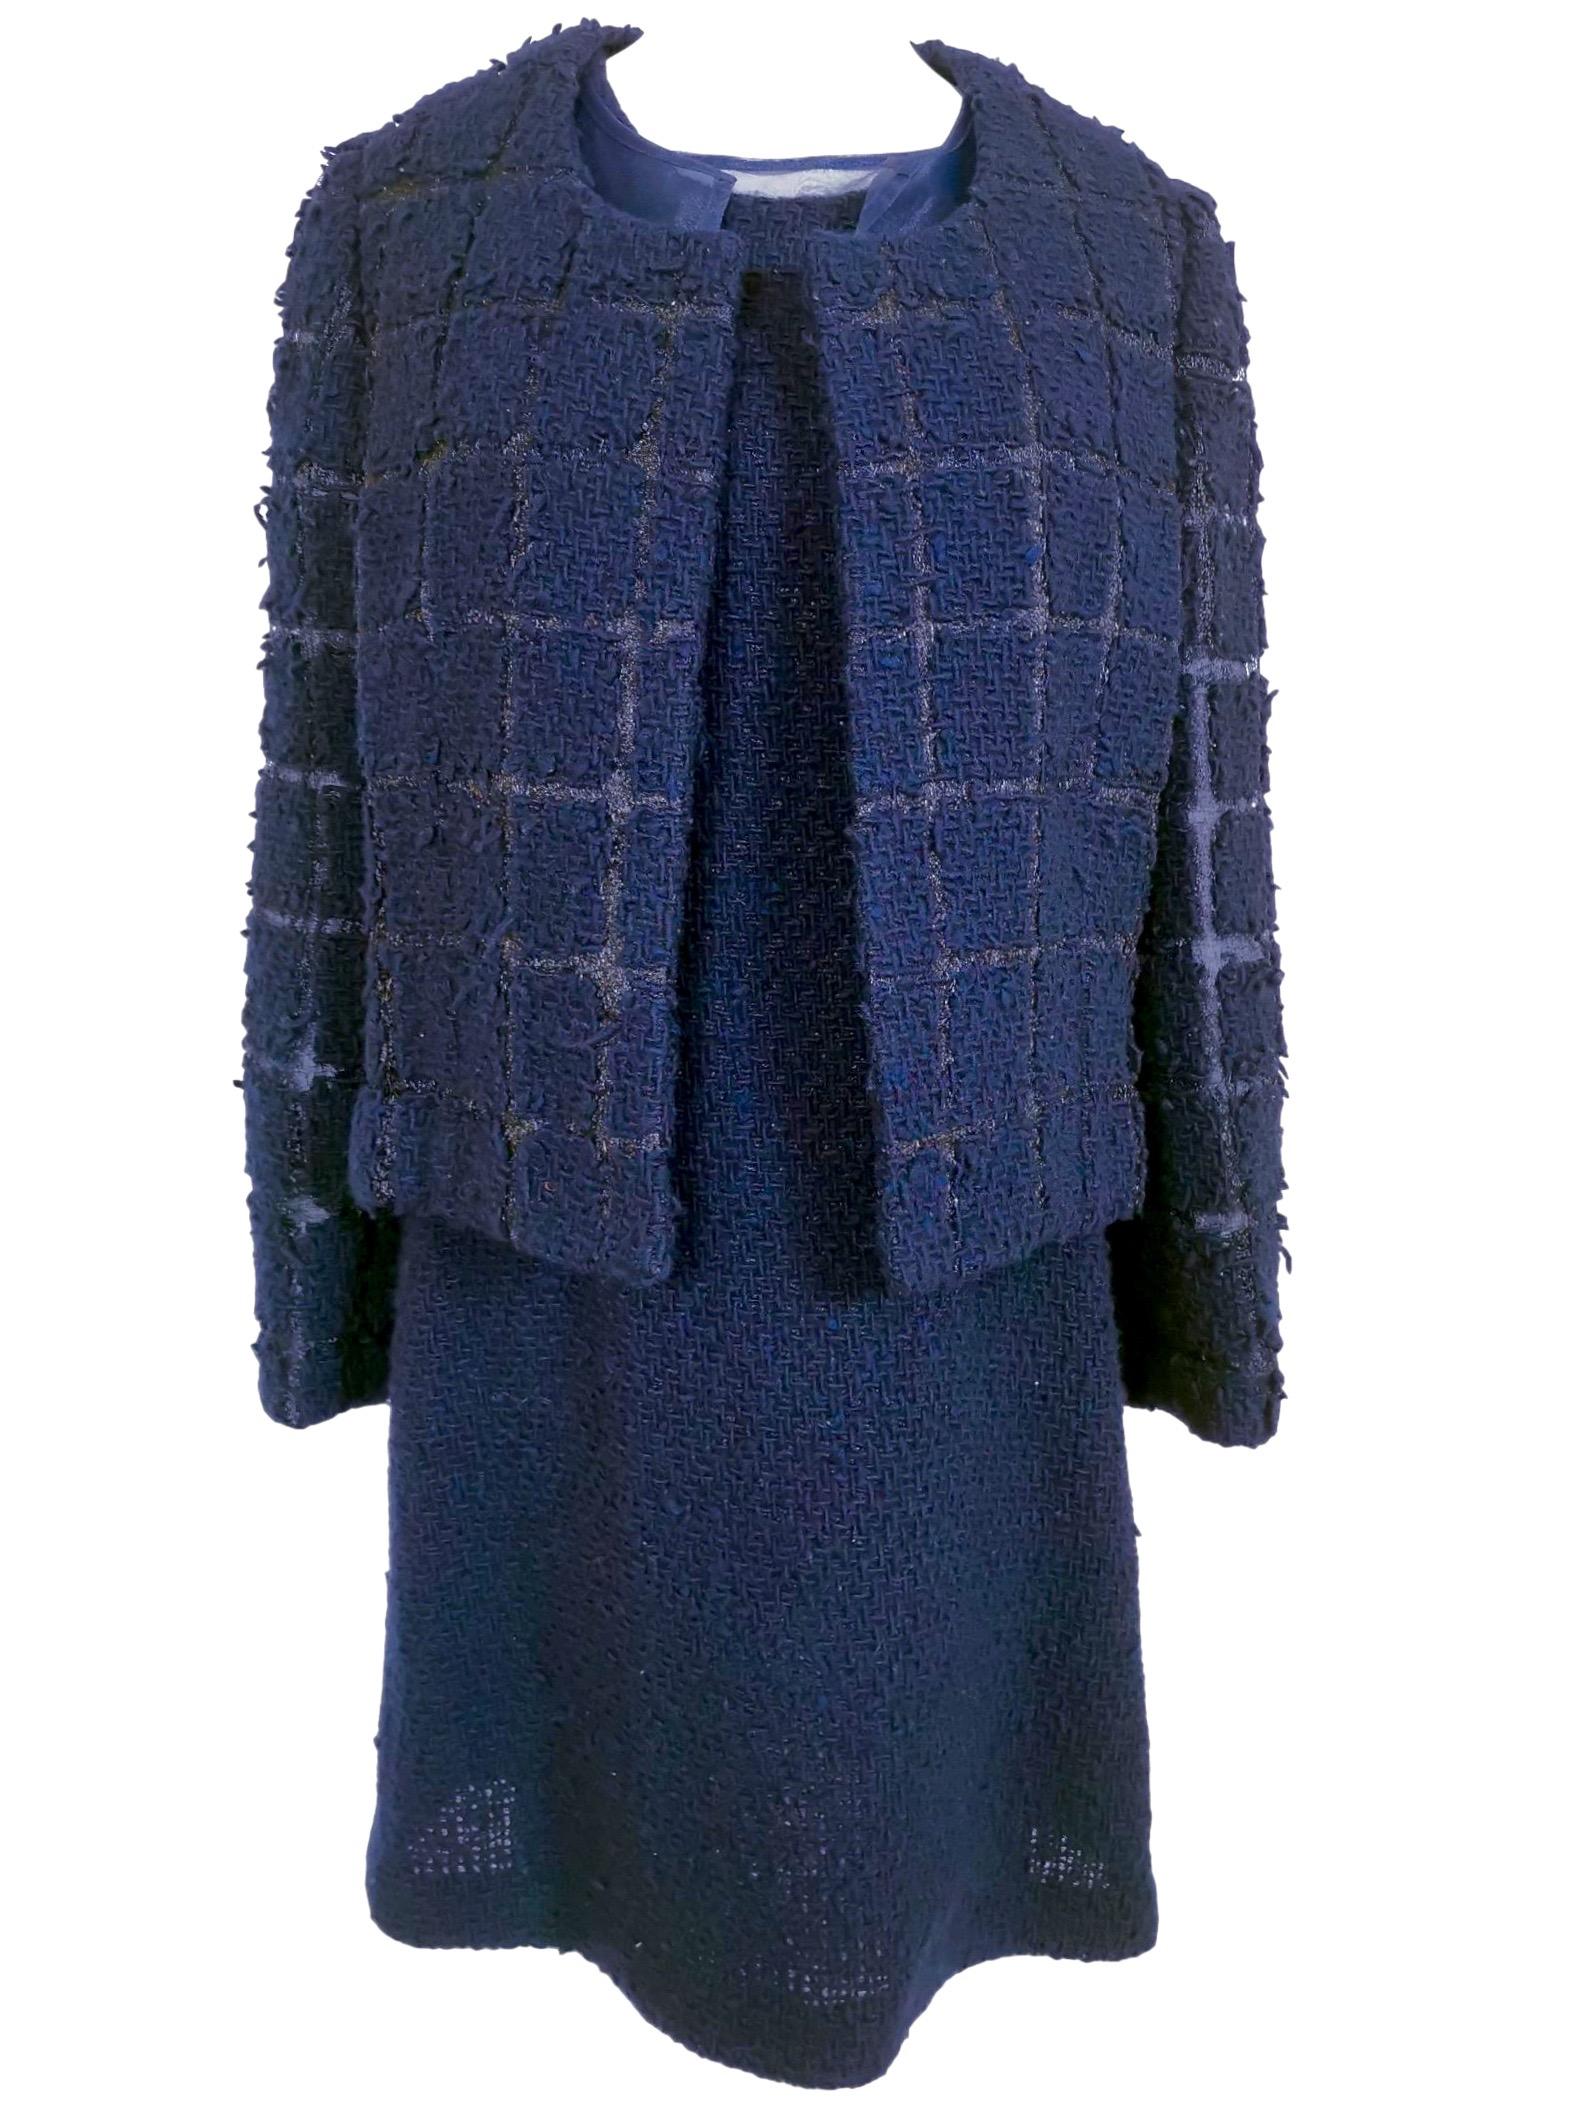 Women's Comme des Garcons 1997 Organza Lined Wool Dress and Jacket For Sale